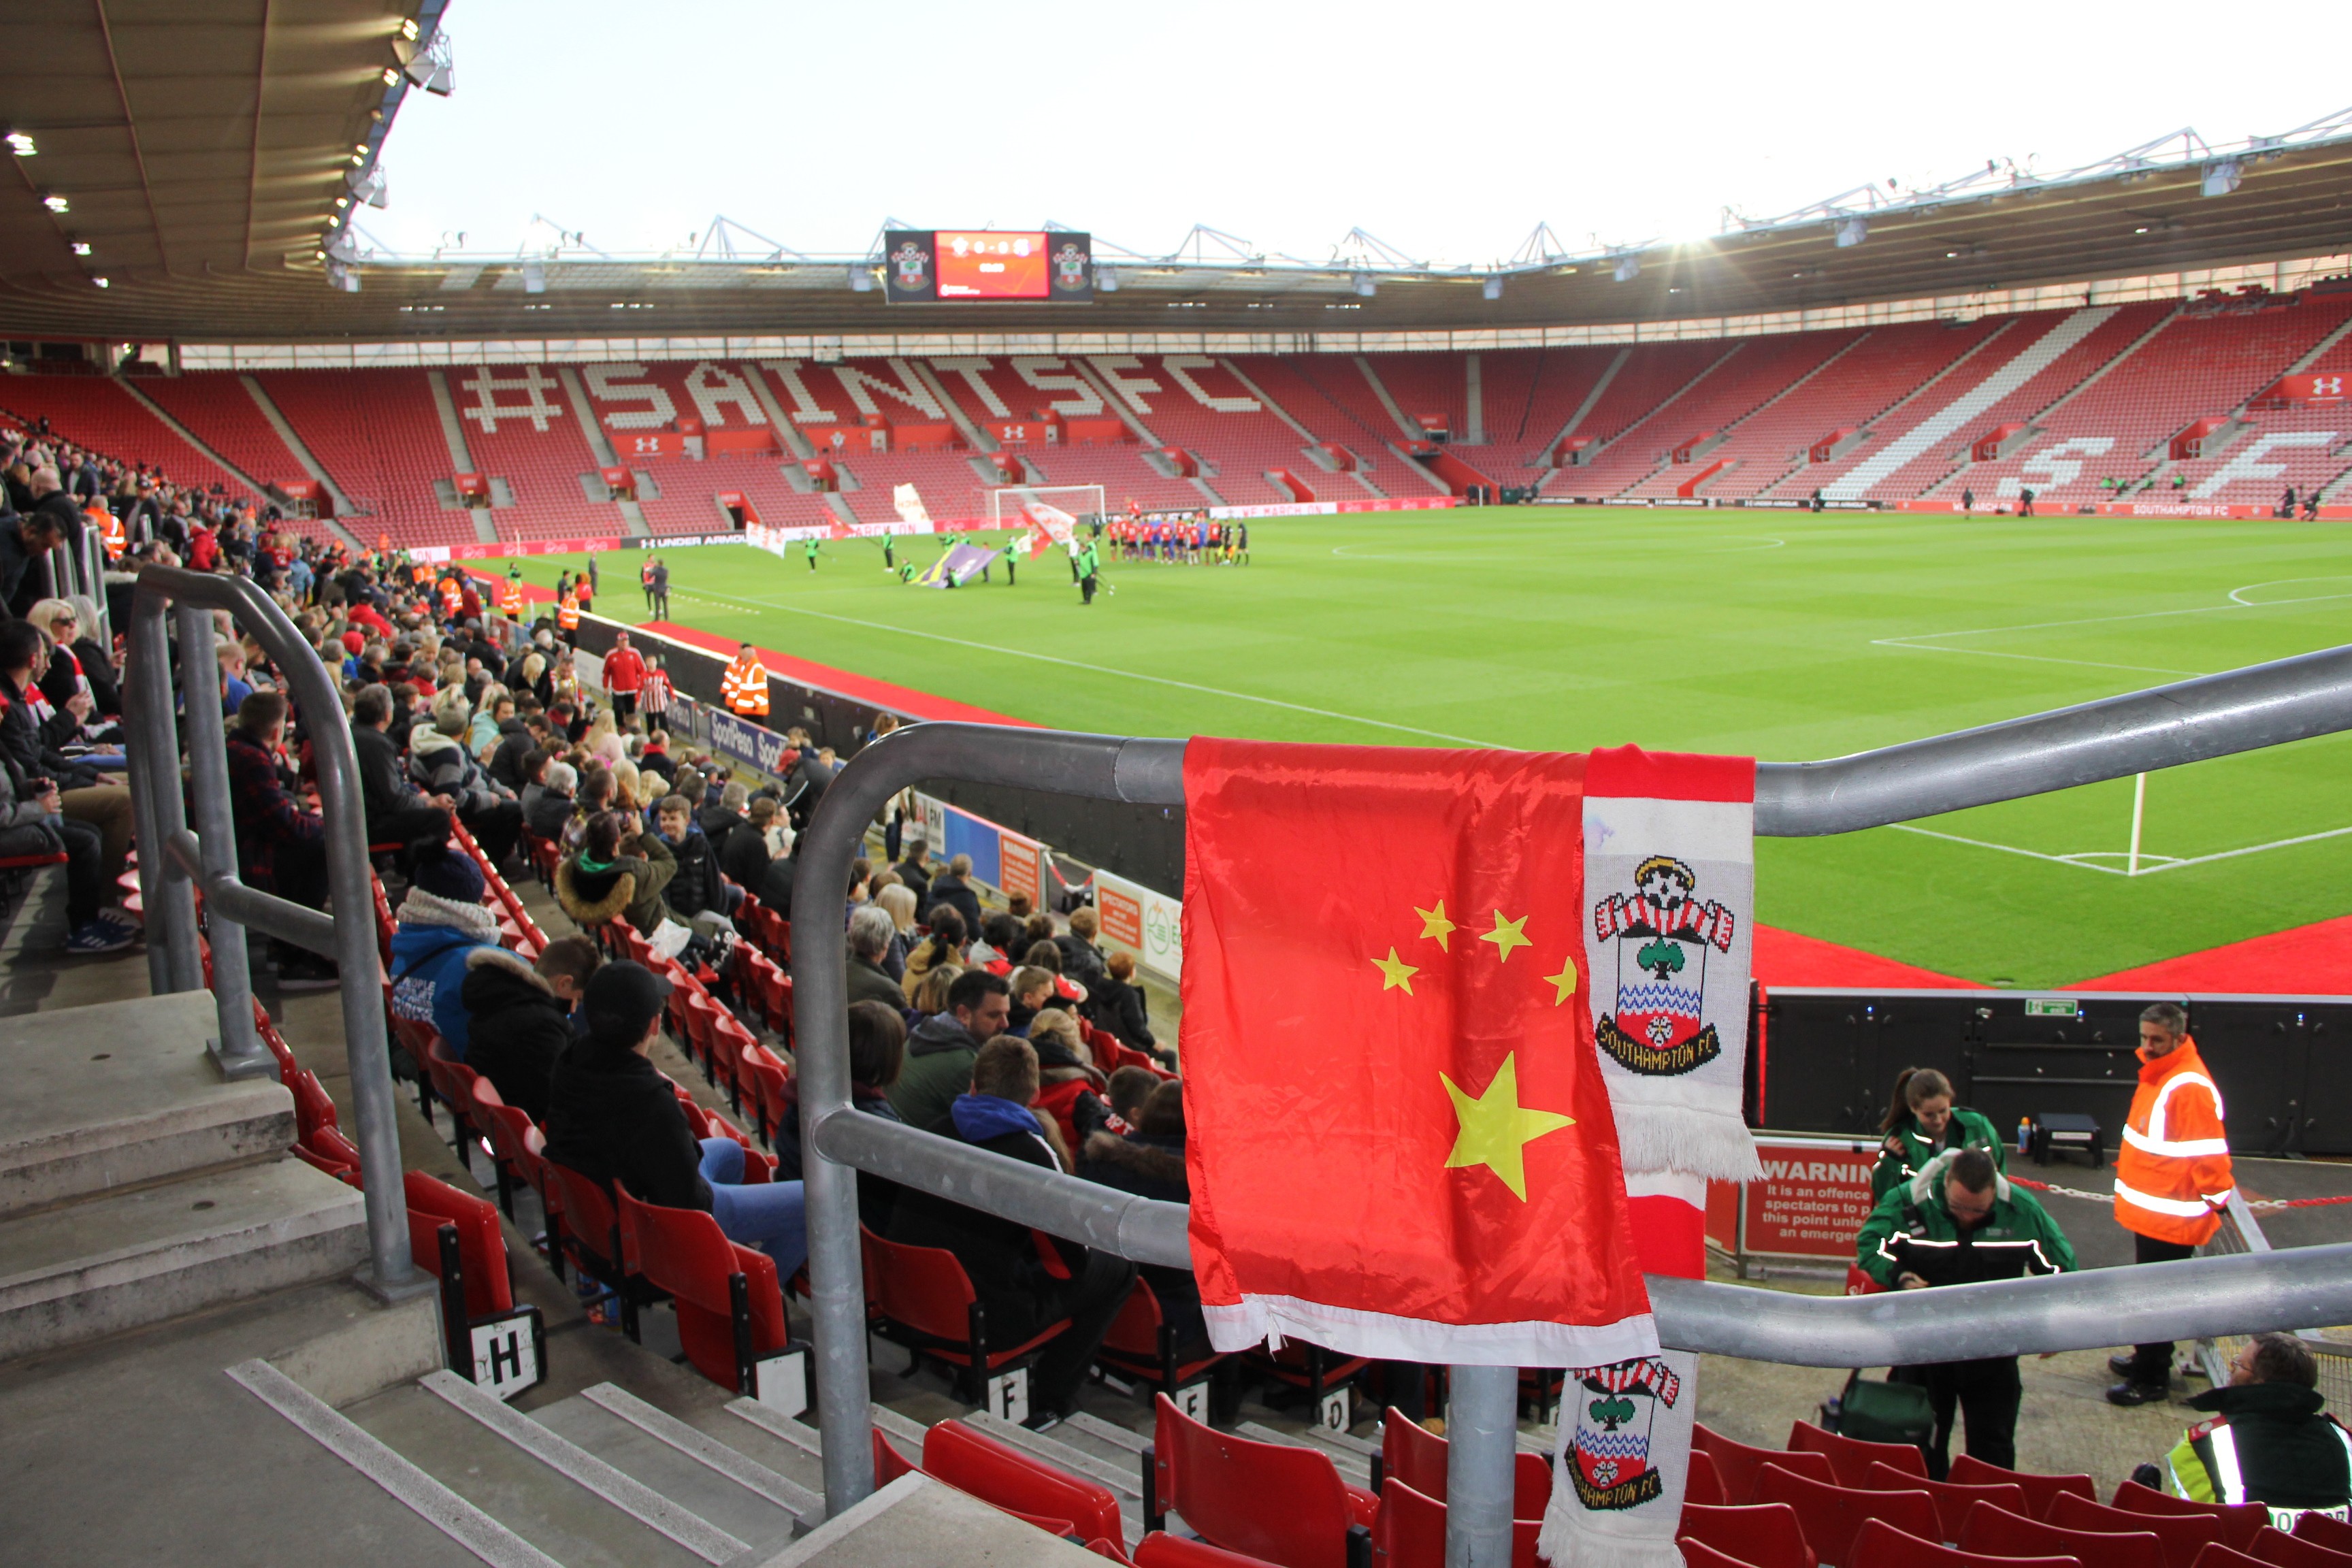 Southampton supporters are concerned about the Chinese ownership of their club. Photo: Peter Simpson